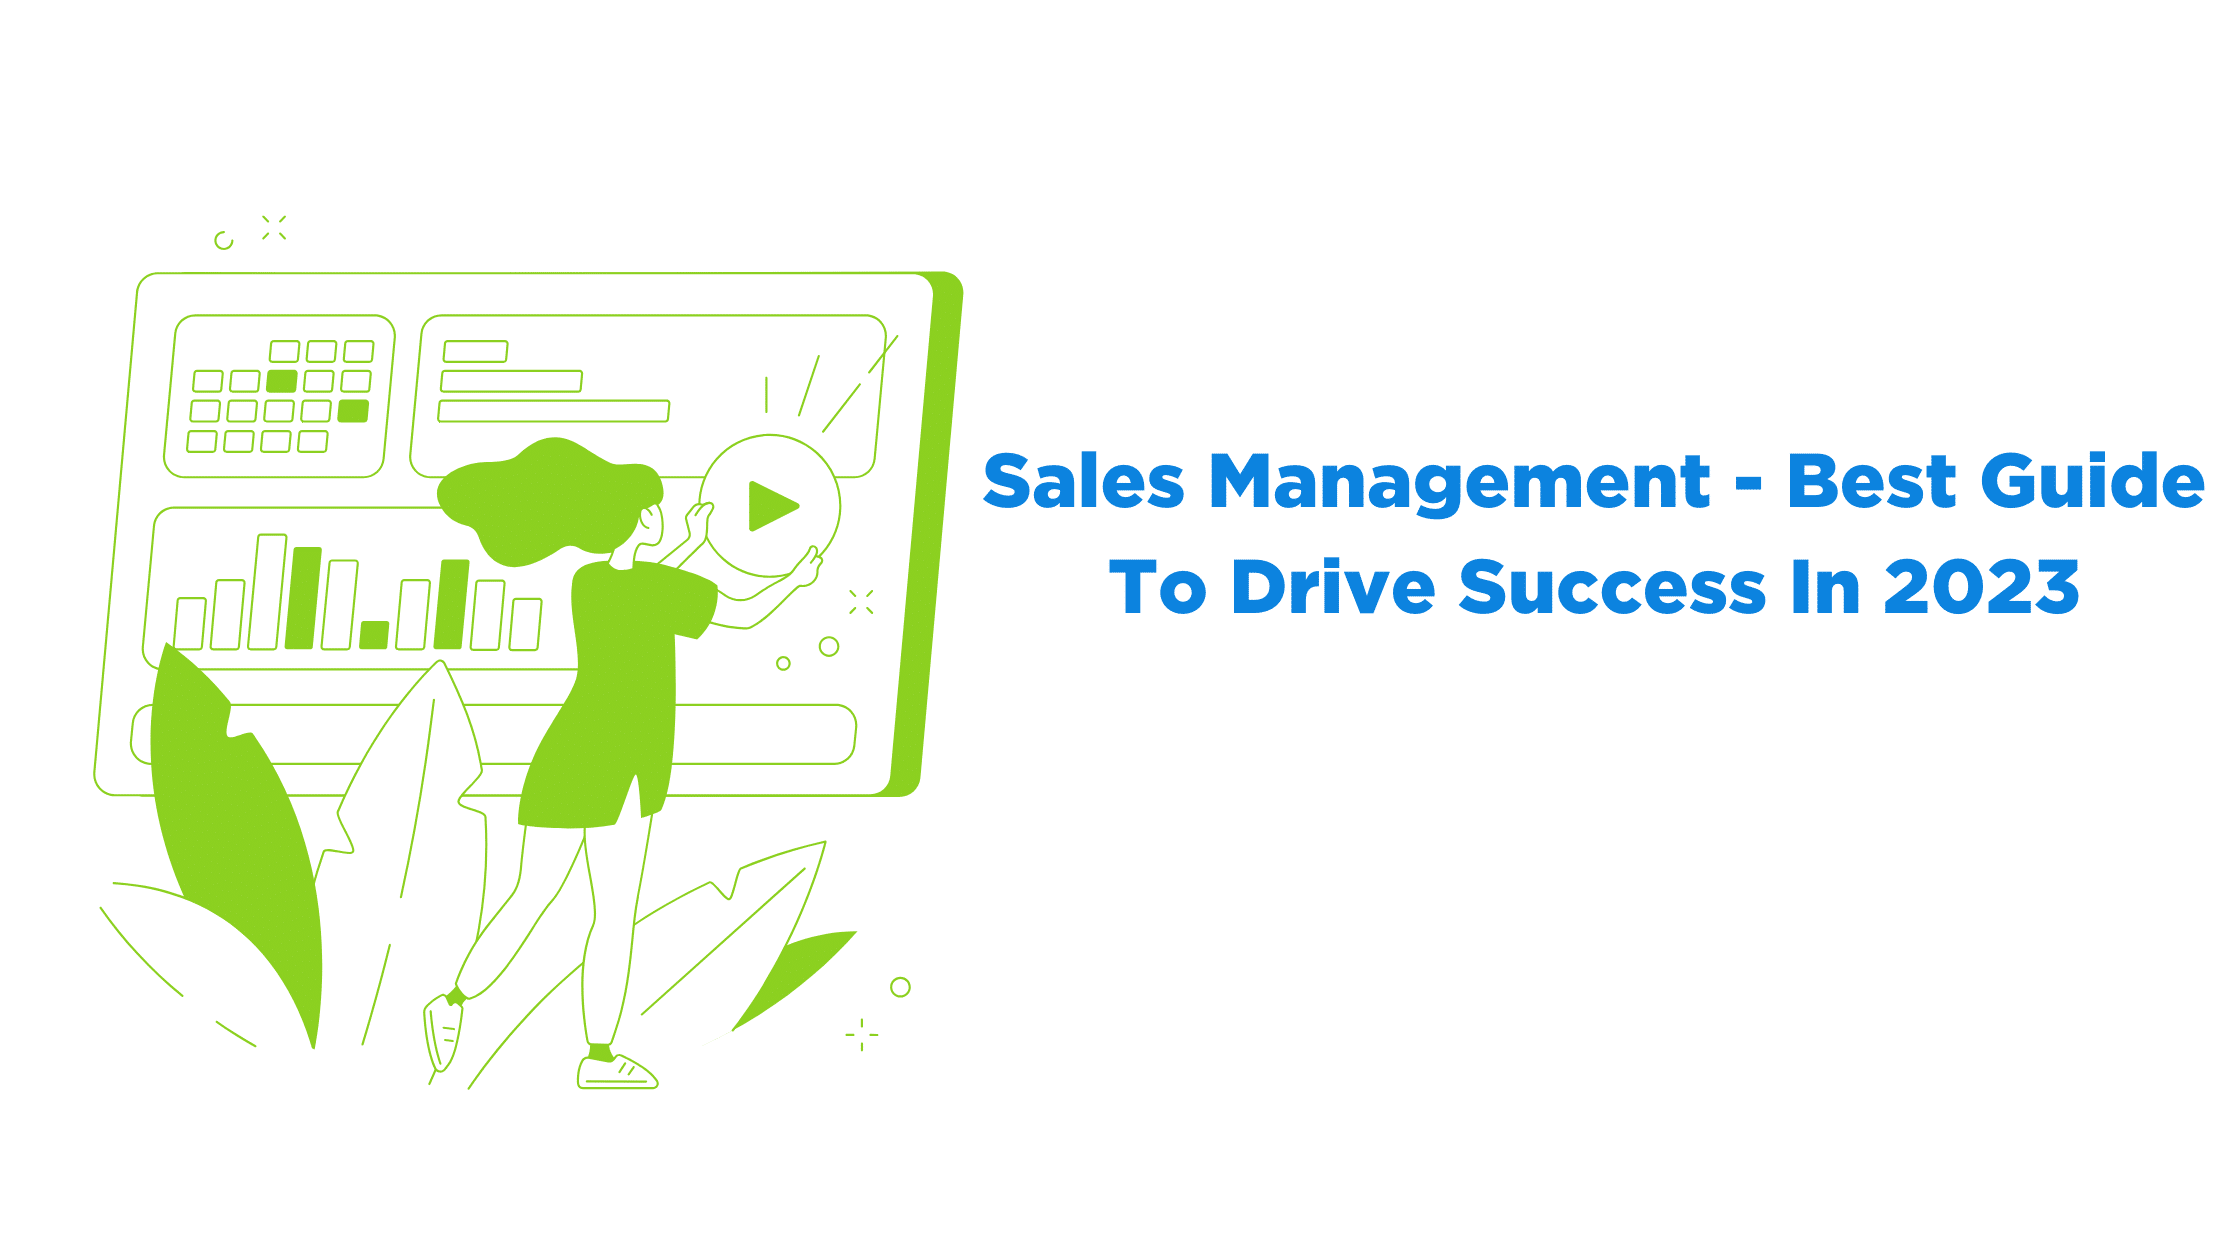 Sales Management - Best Guide To Drive Success In 2023